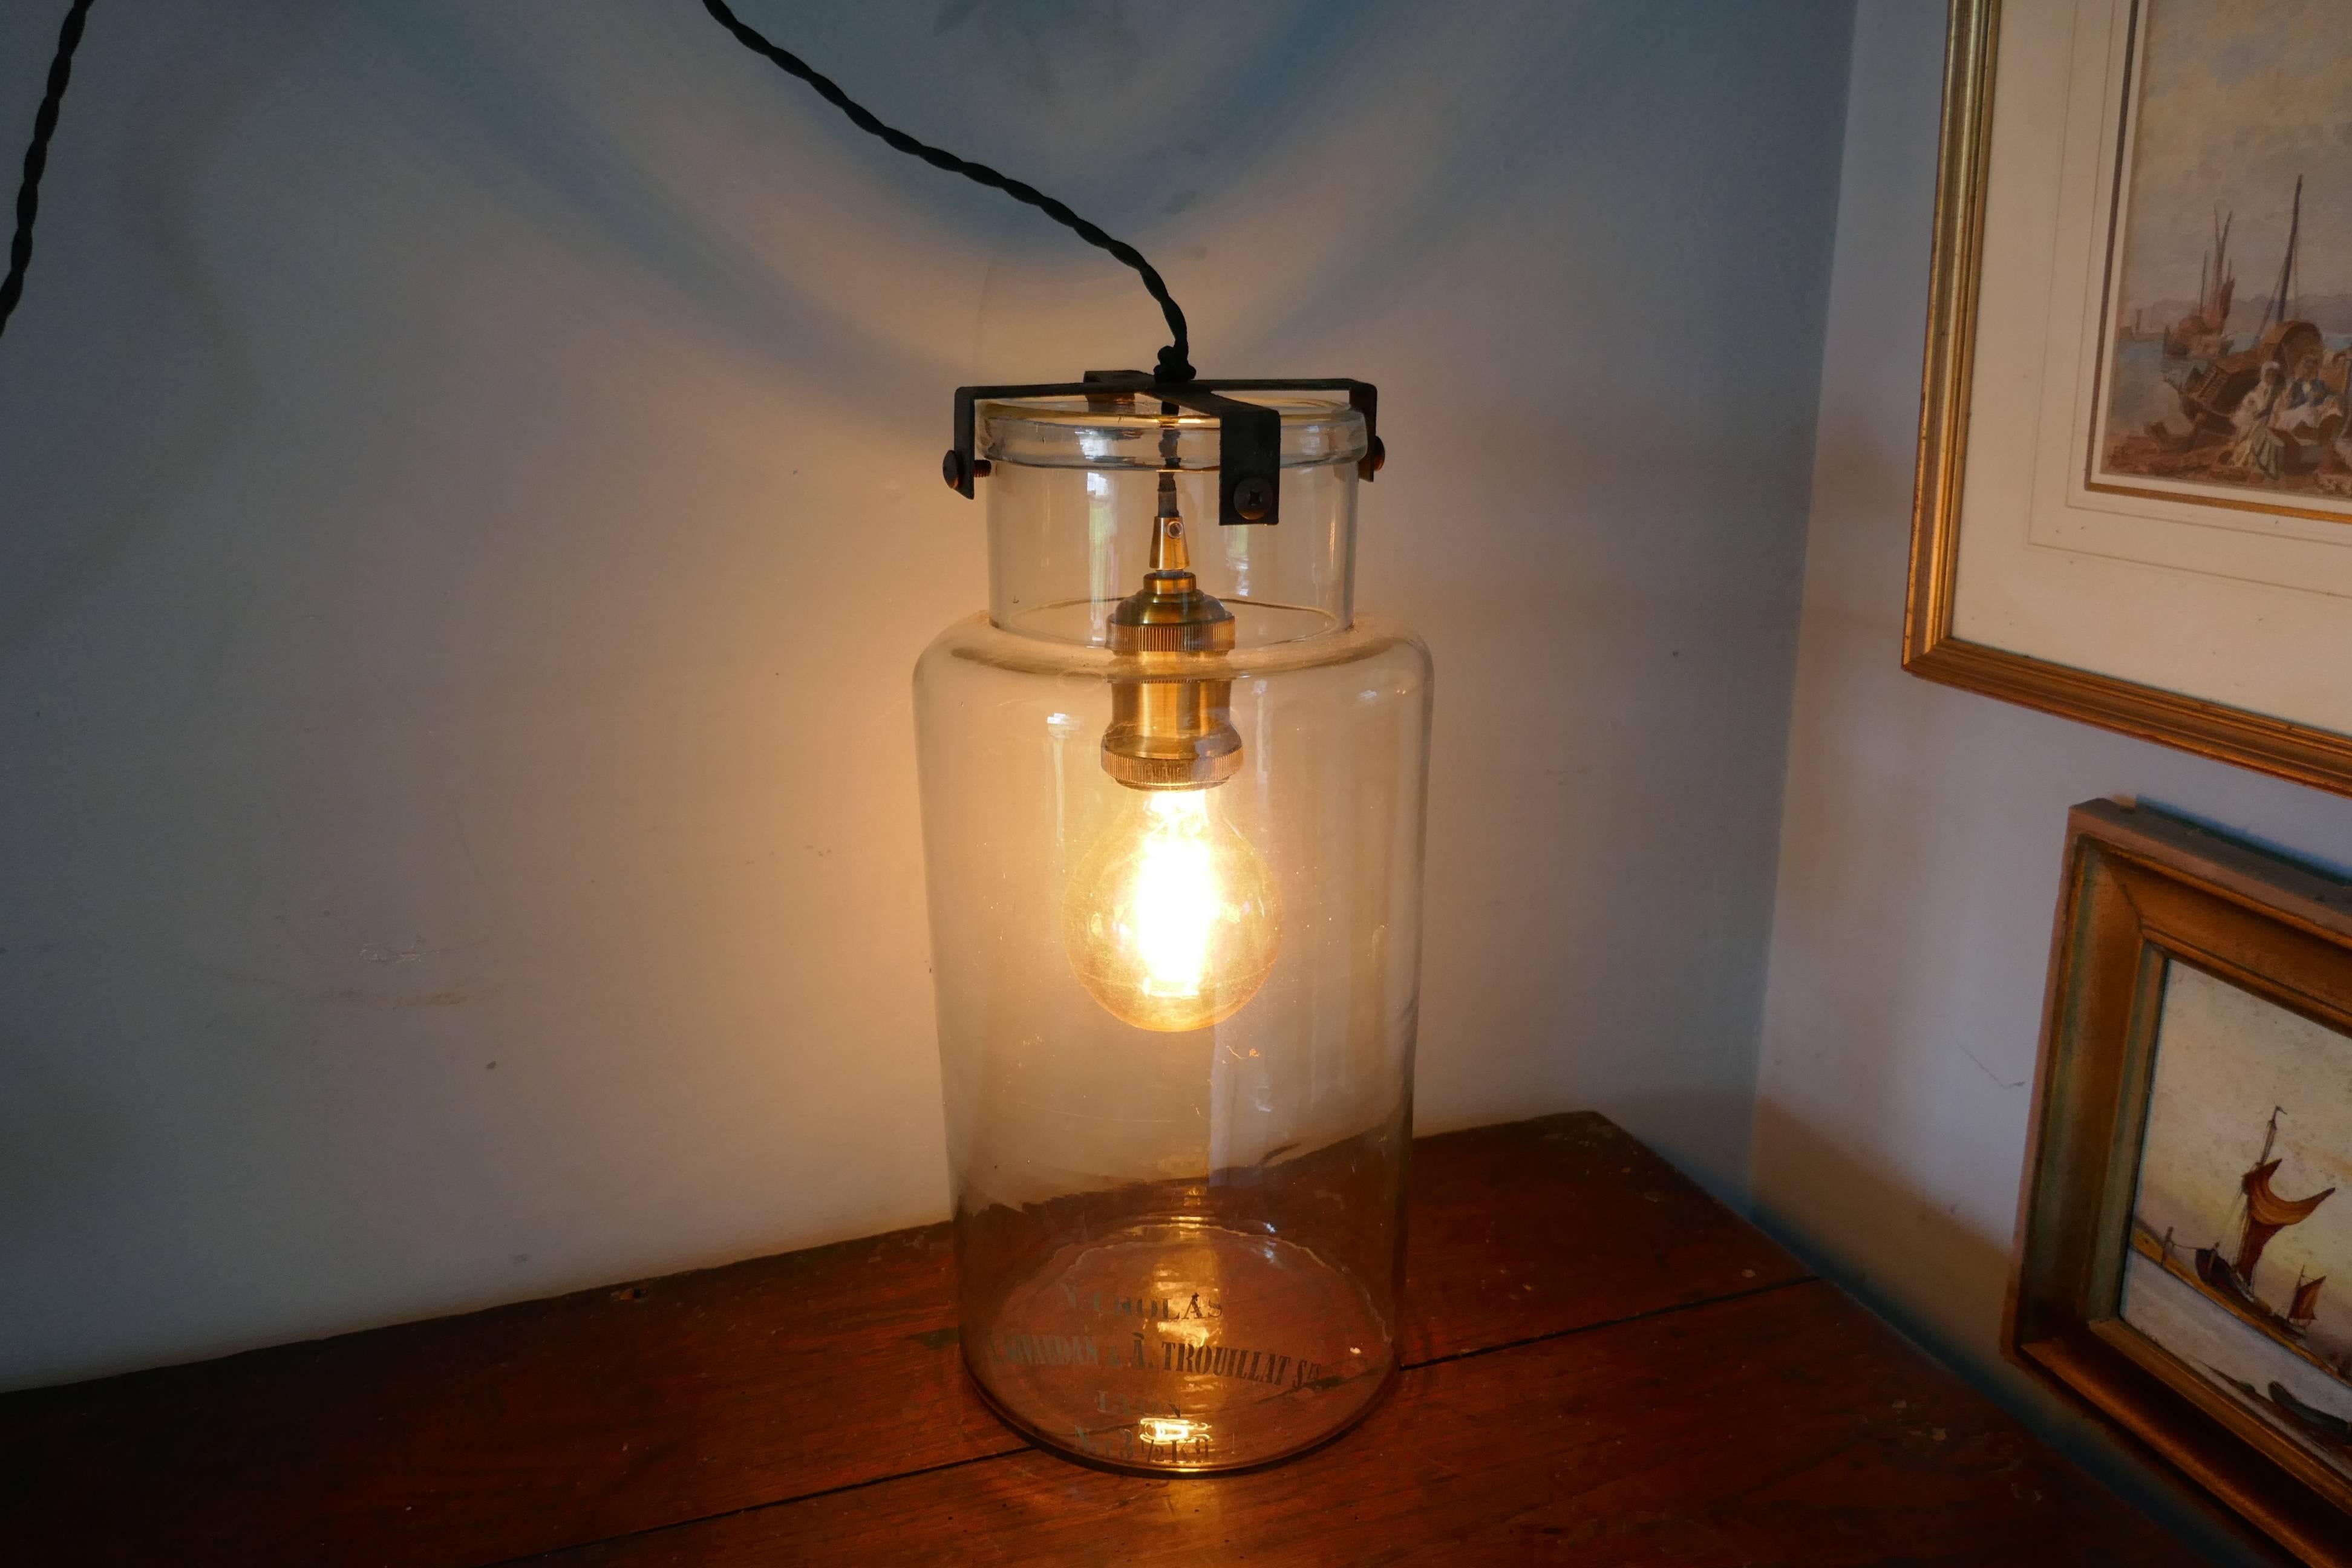 French Industrial lamp retro design

The lamp has been made from an Industrial glass Jar, dating back to the 19th Century which has been wired and fitted with an Edison light bulb
The heavy glass jars is 14.5 “ tall and 7” in diameter, 
There